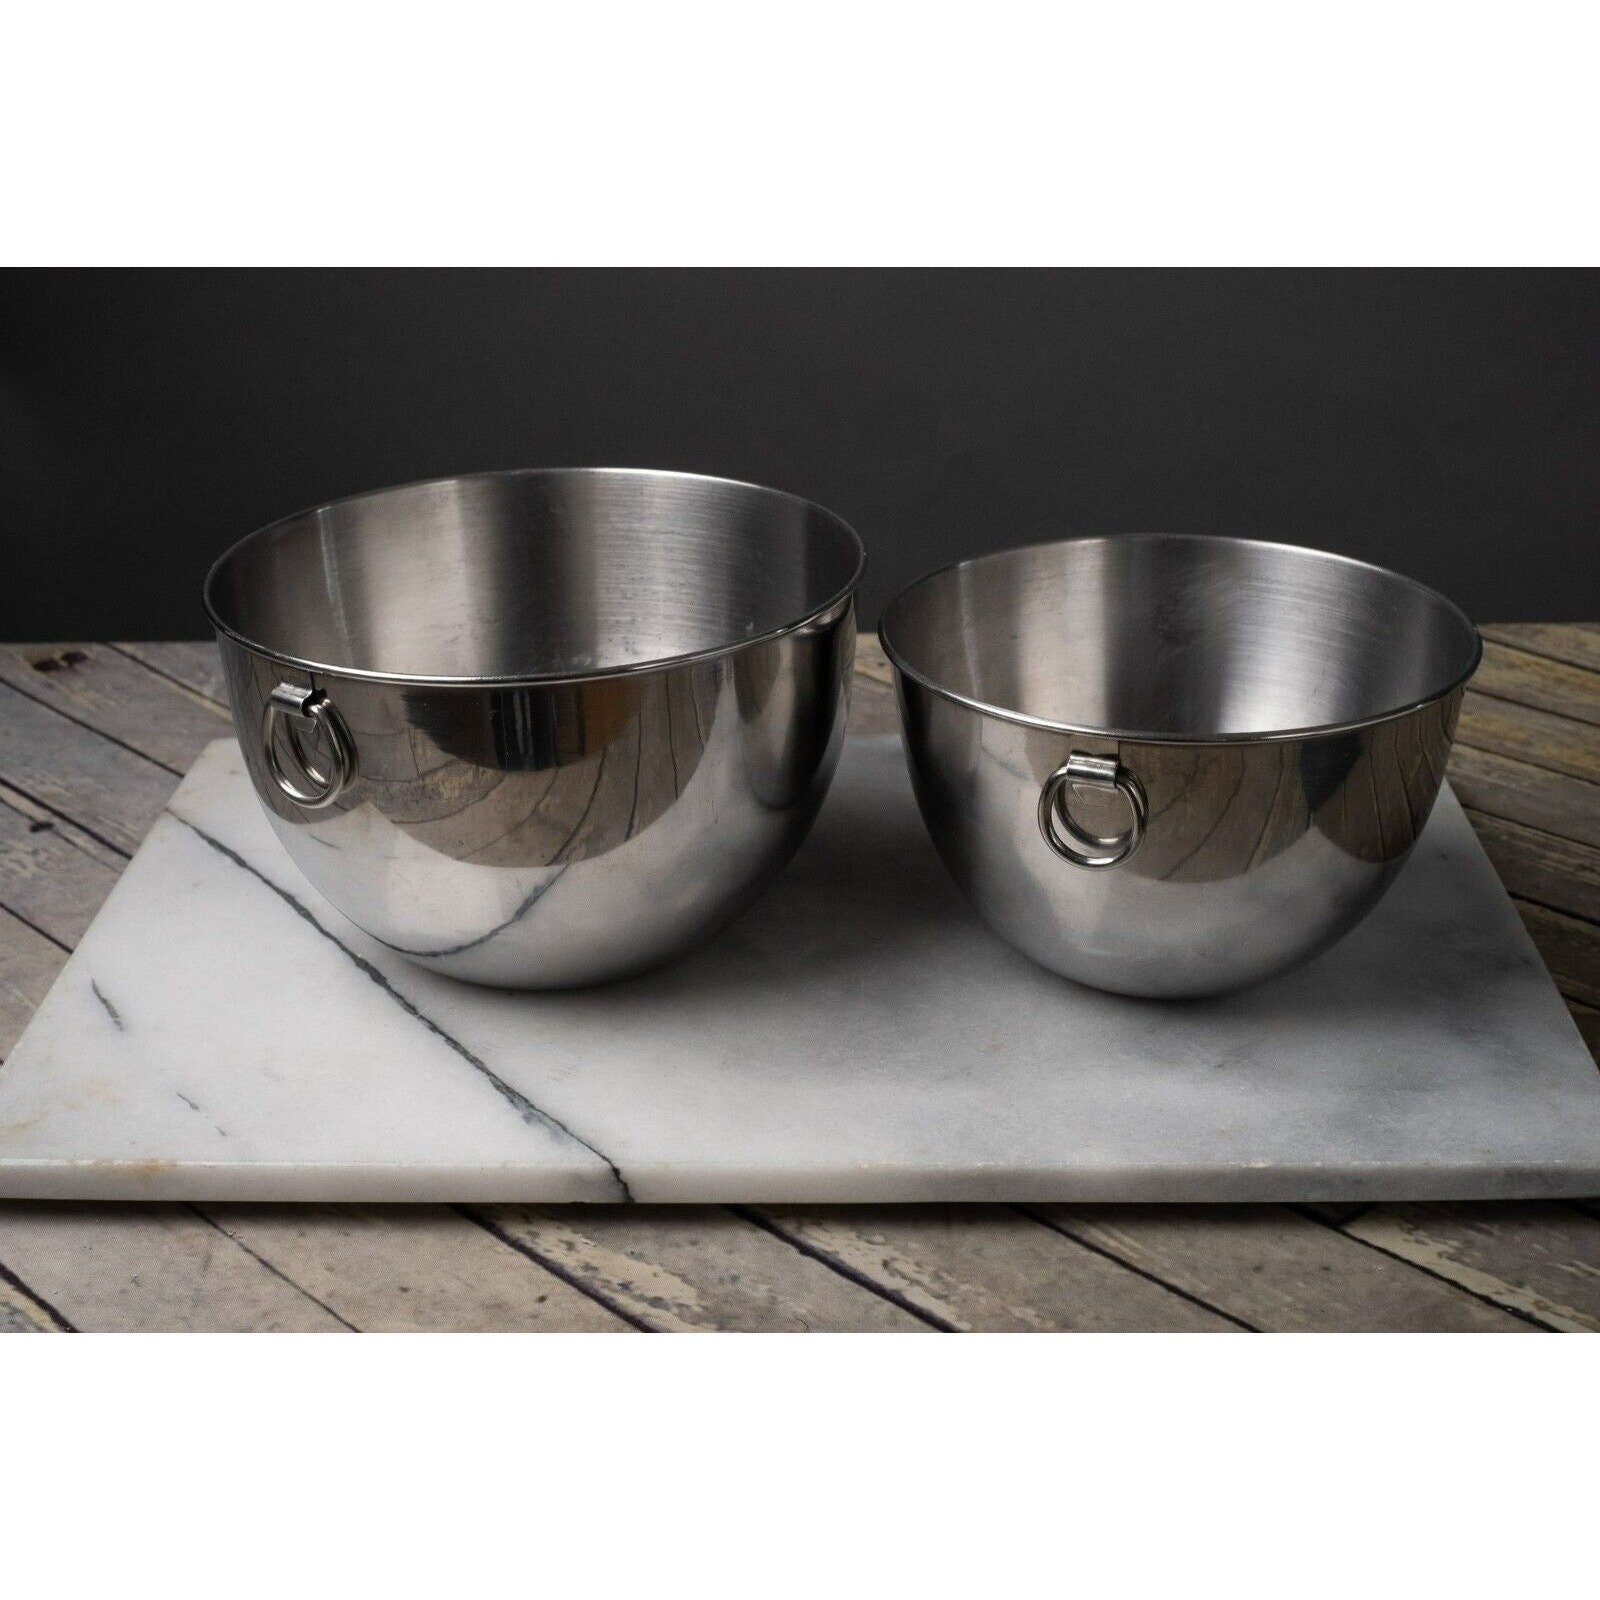 Revere Ware Set of 3 Stainless Steel Mixing Bowls D Rings Plastic